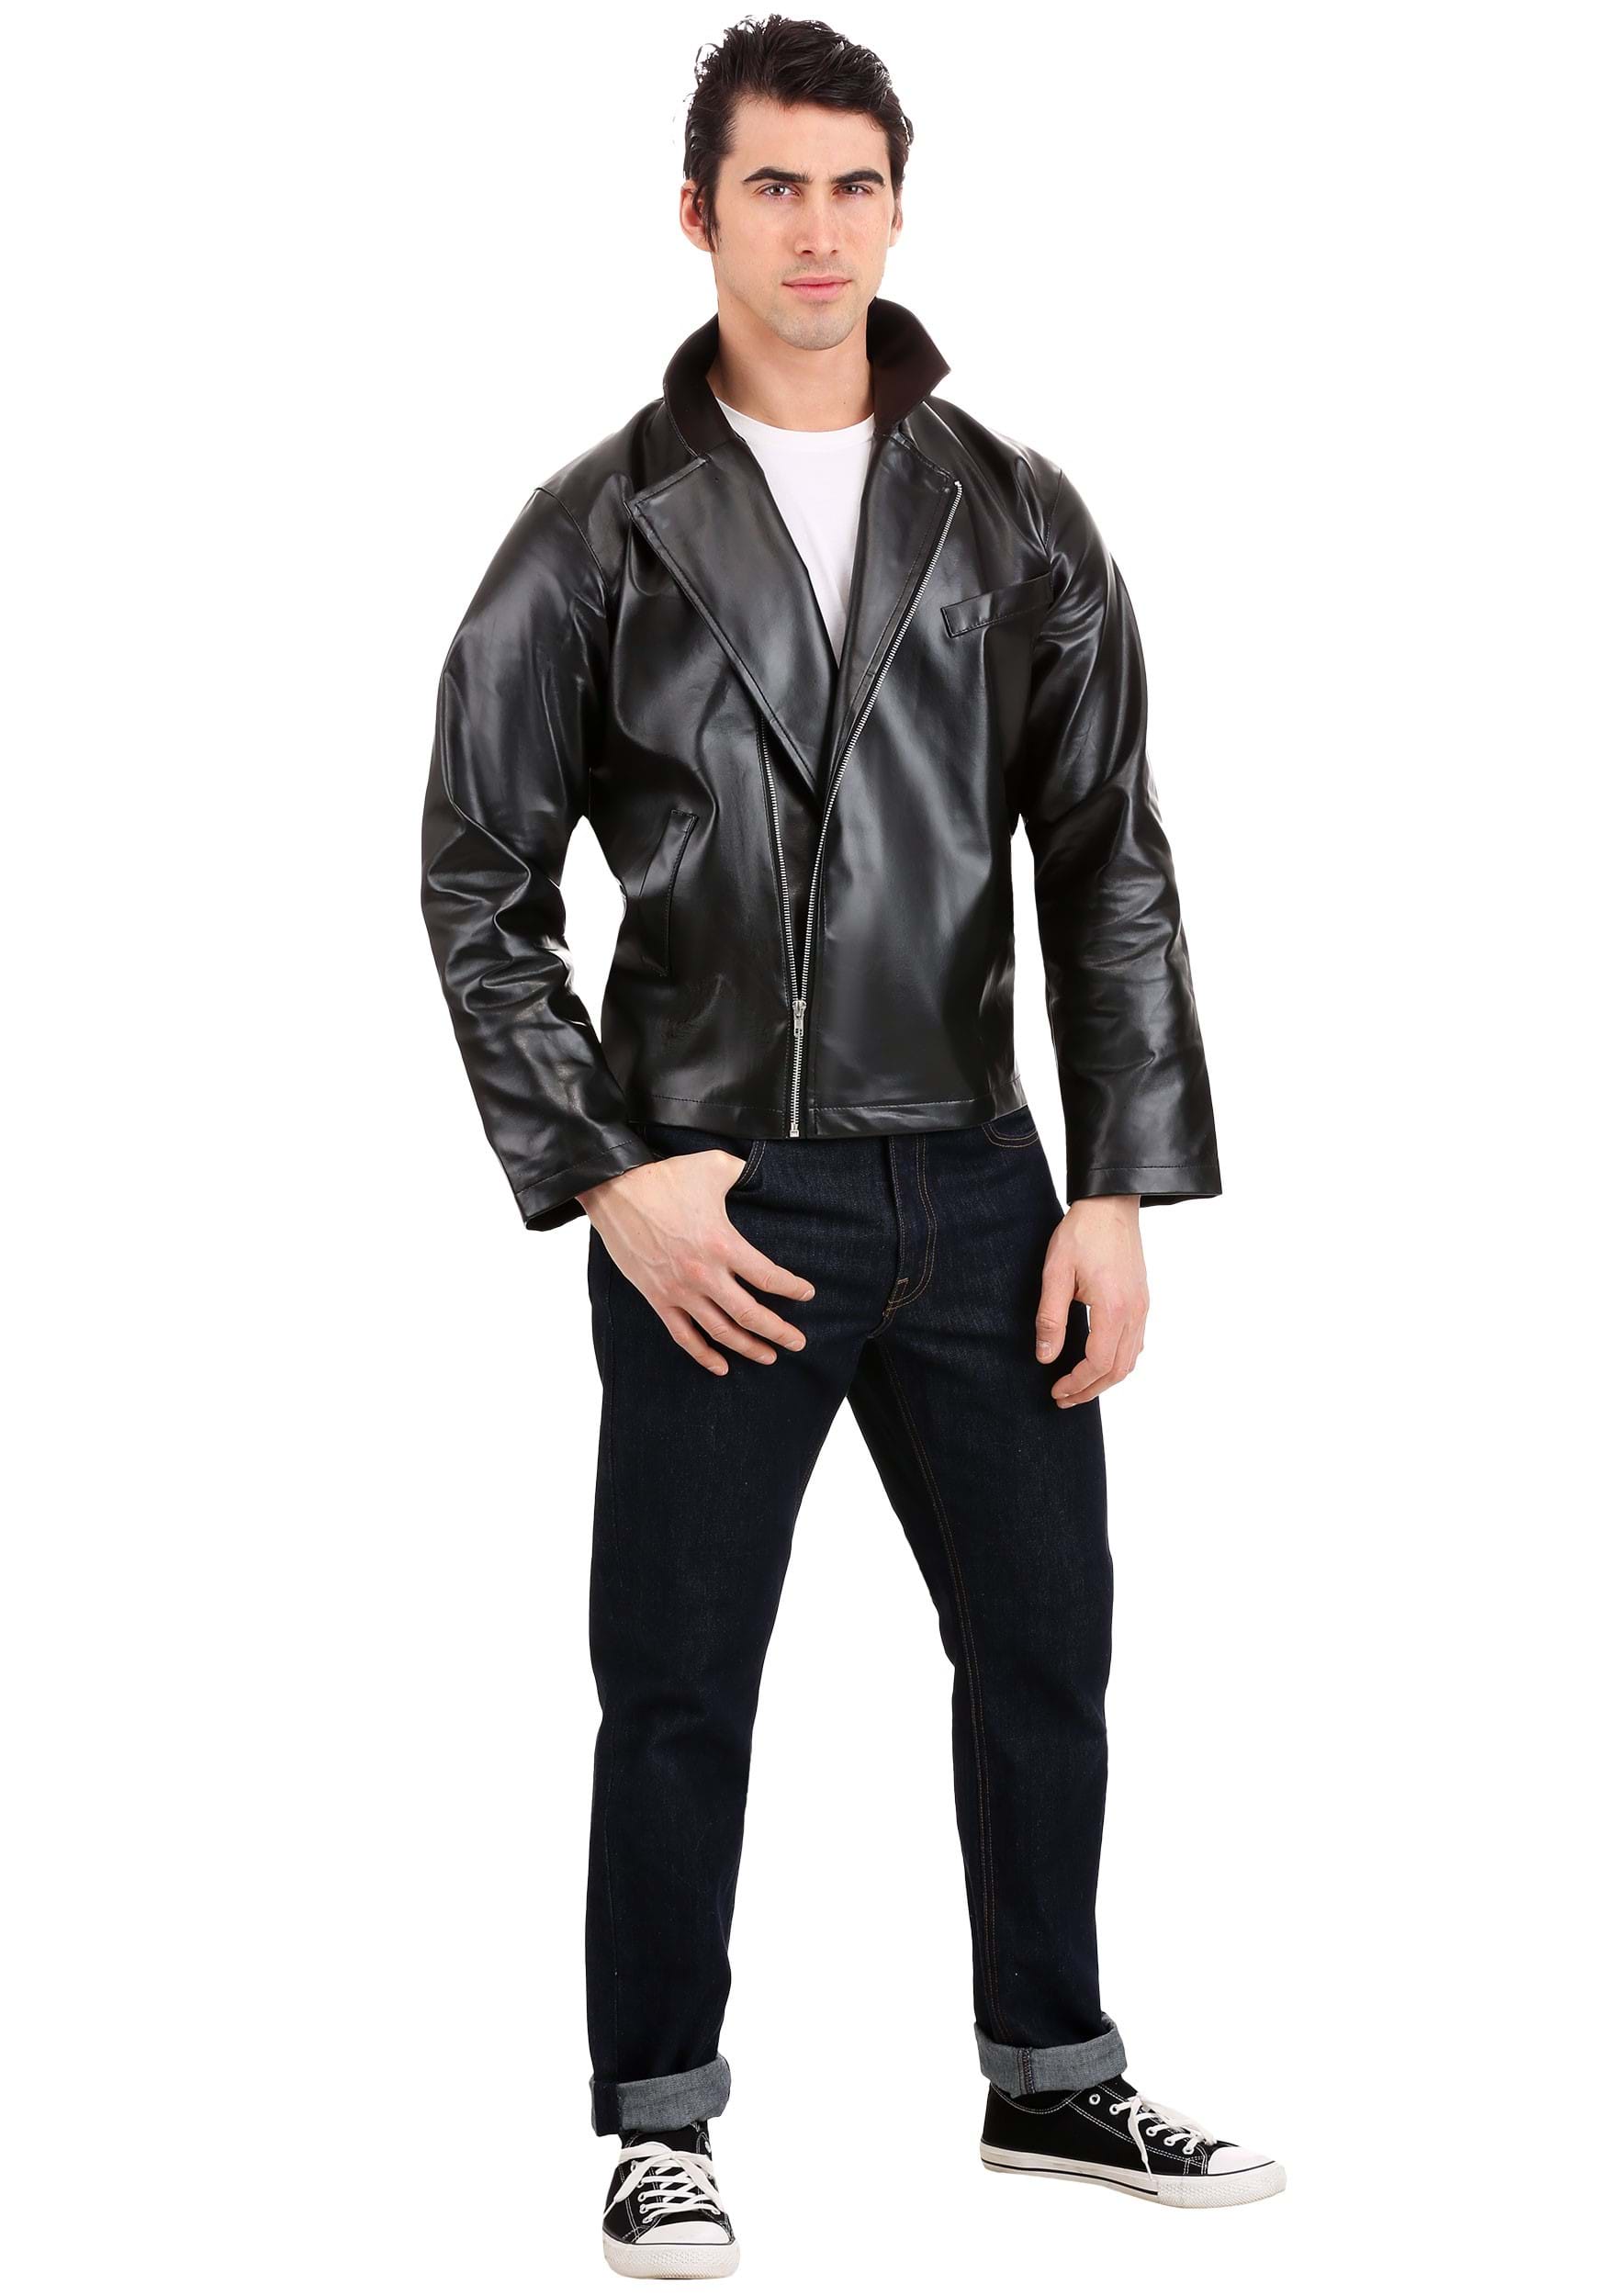 Image of Grease T-Birds Jacket  Plus Size Costume ID GRE6007PL-4X